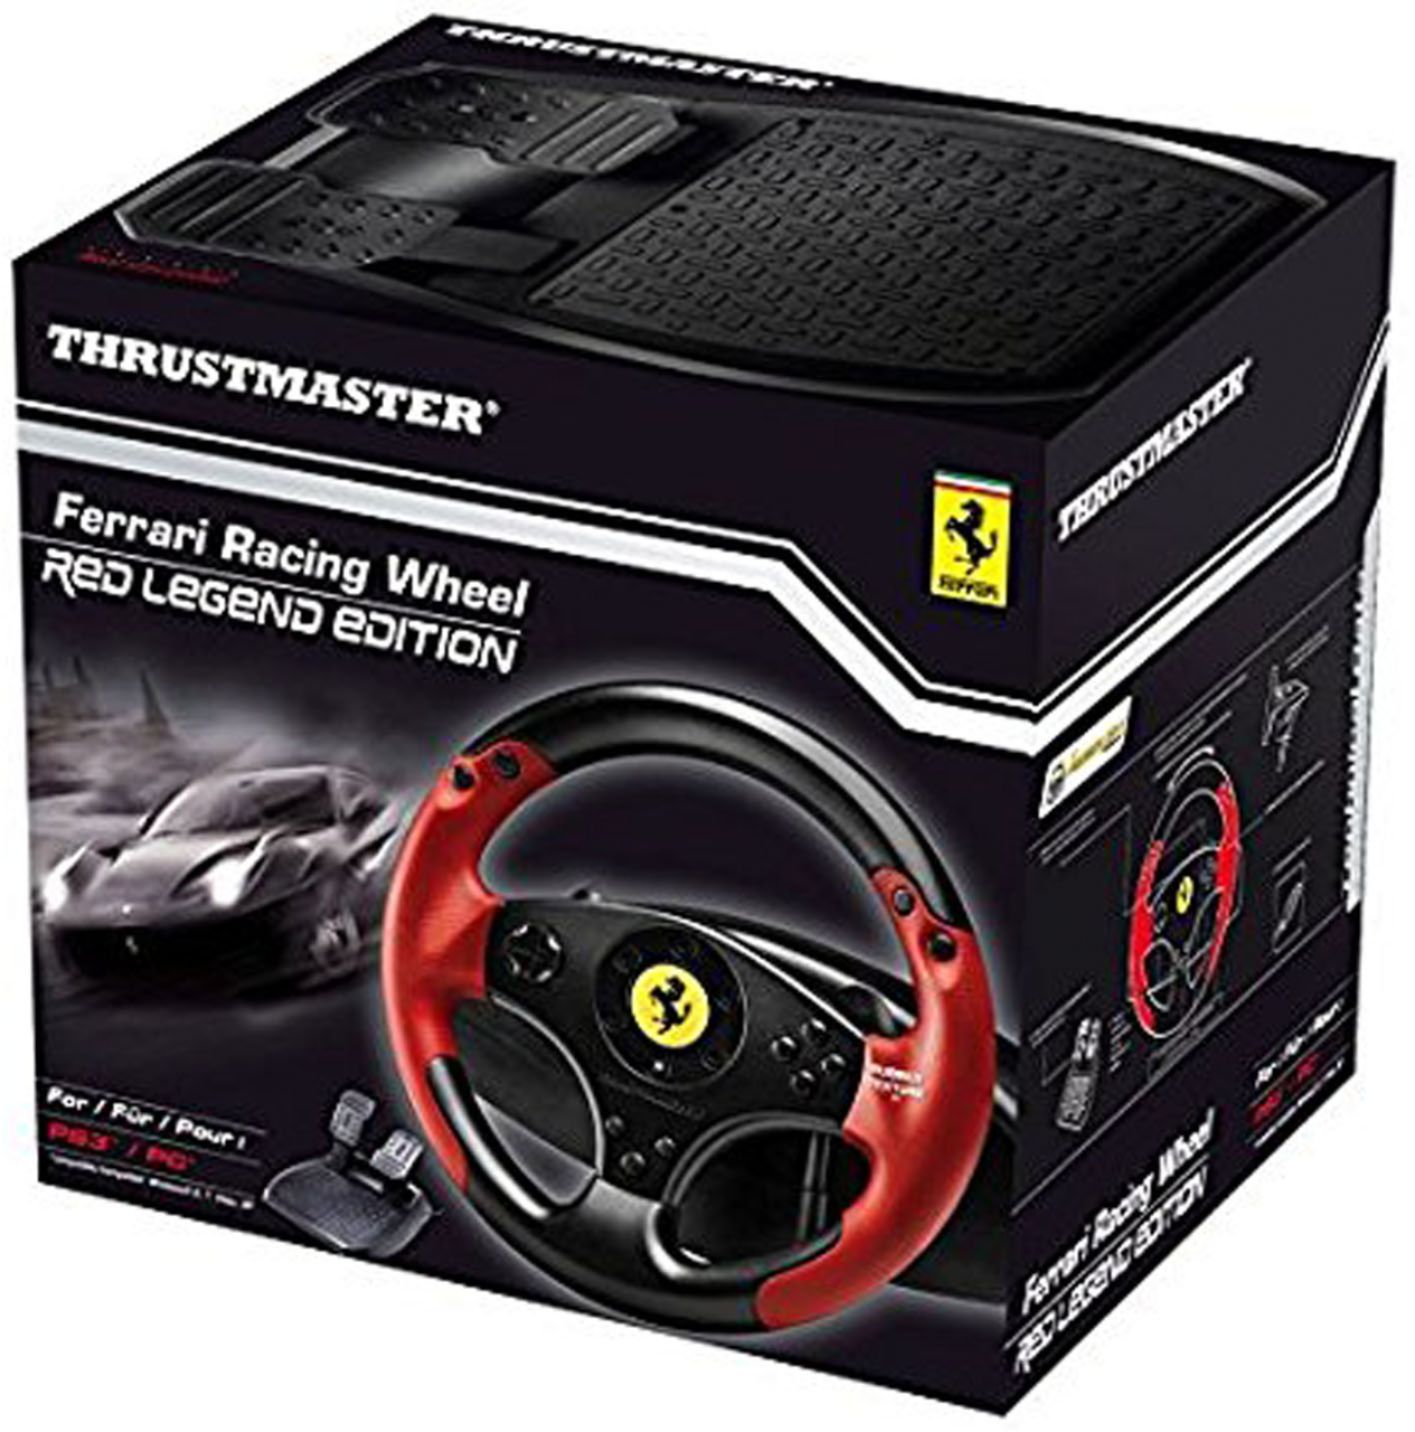 elektropositive Lejlighedsvis ammunition Best Buy: Thrustmaster Ferrari Red Legend Edition Racing Wheel for PC and  Sony PlayStation 3 Red 4060052